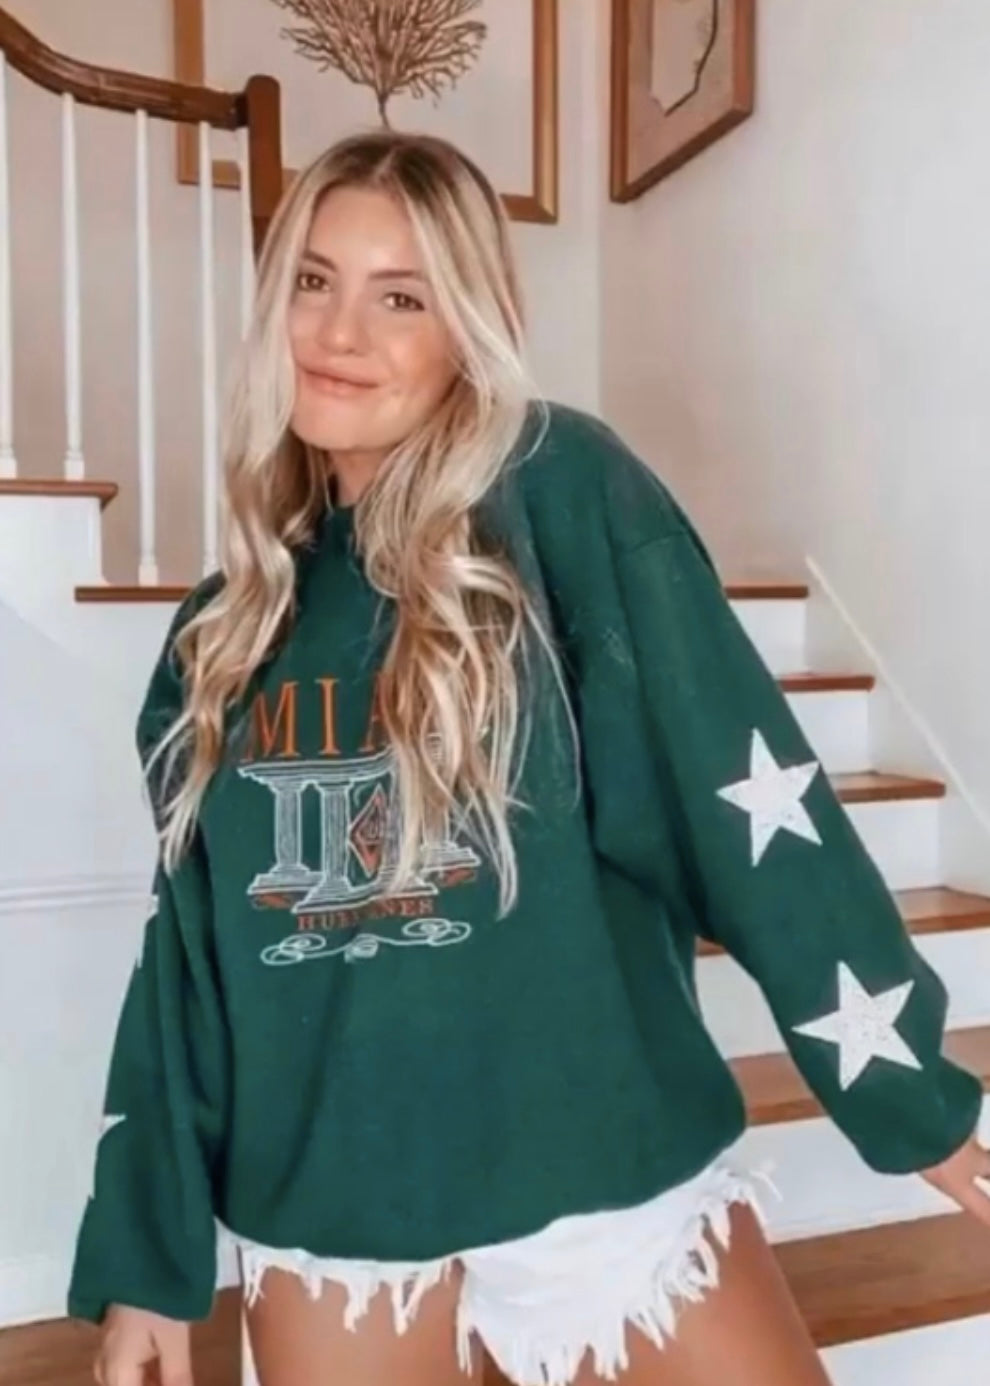 University of Miami, One of a KIND Vintage UM LAW Sweatshirt with Crystal Star Design